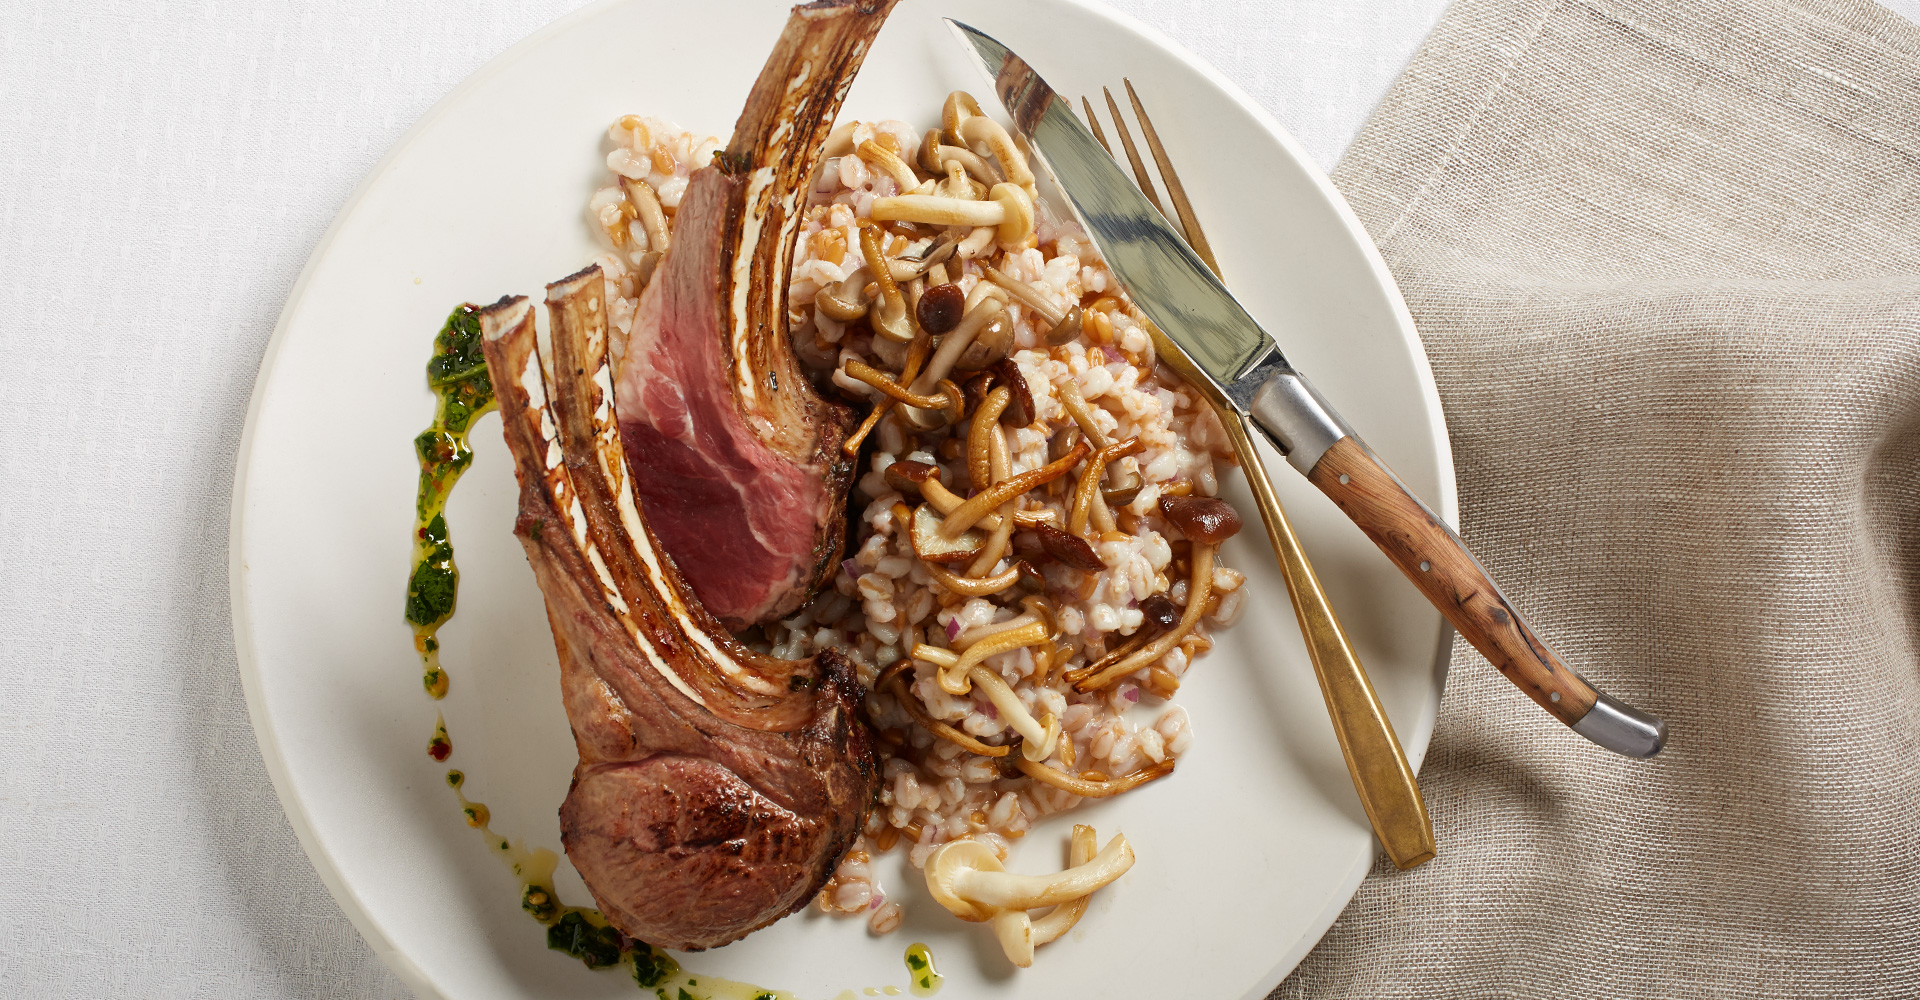 A plate with lamb chops and rice on it